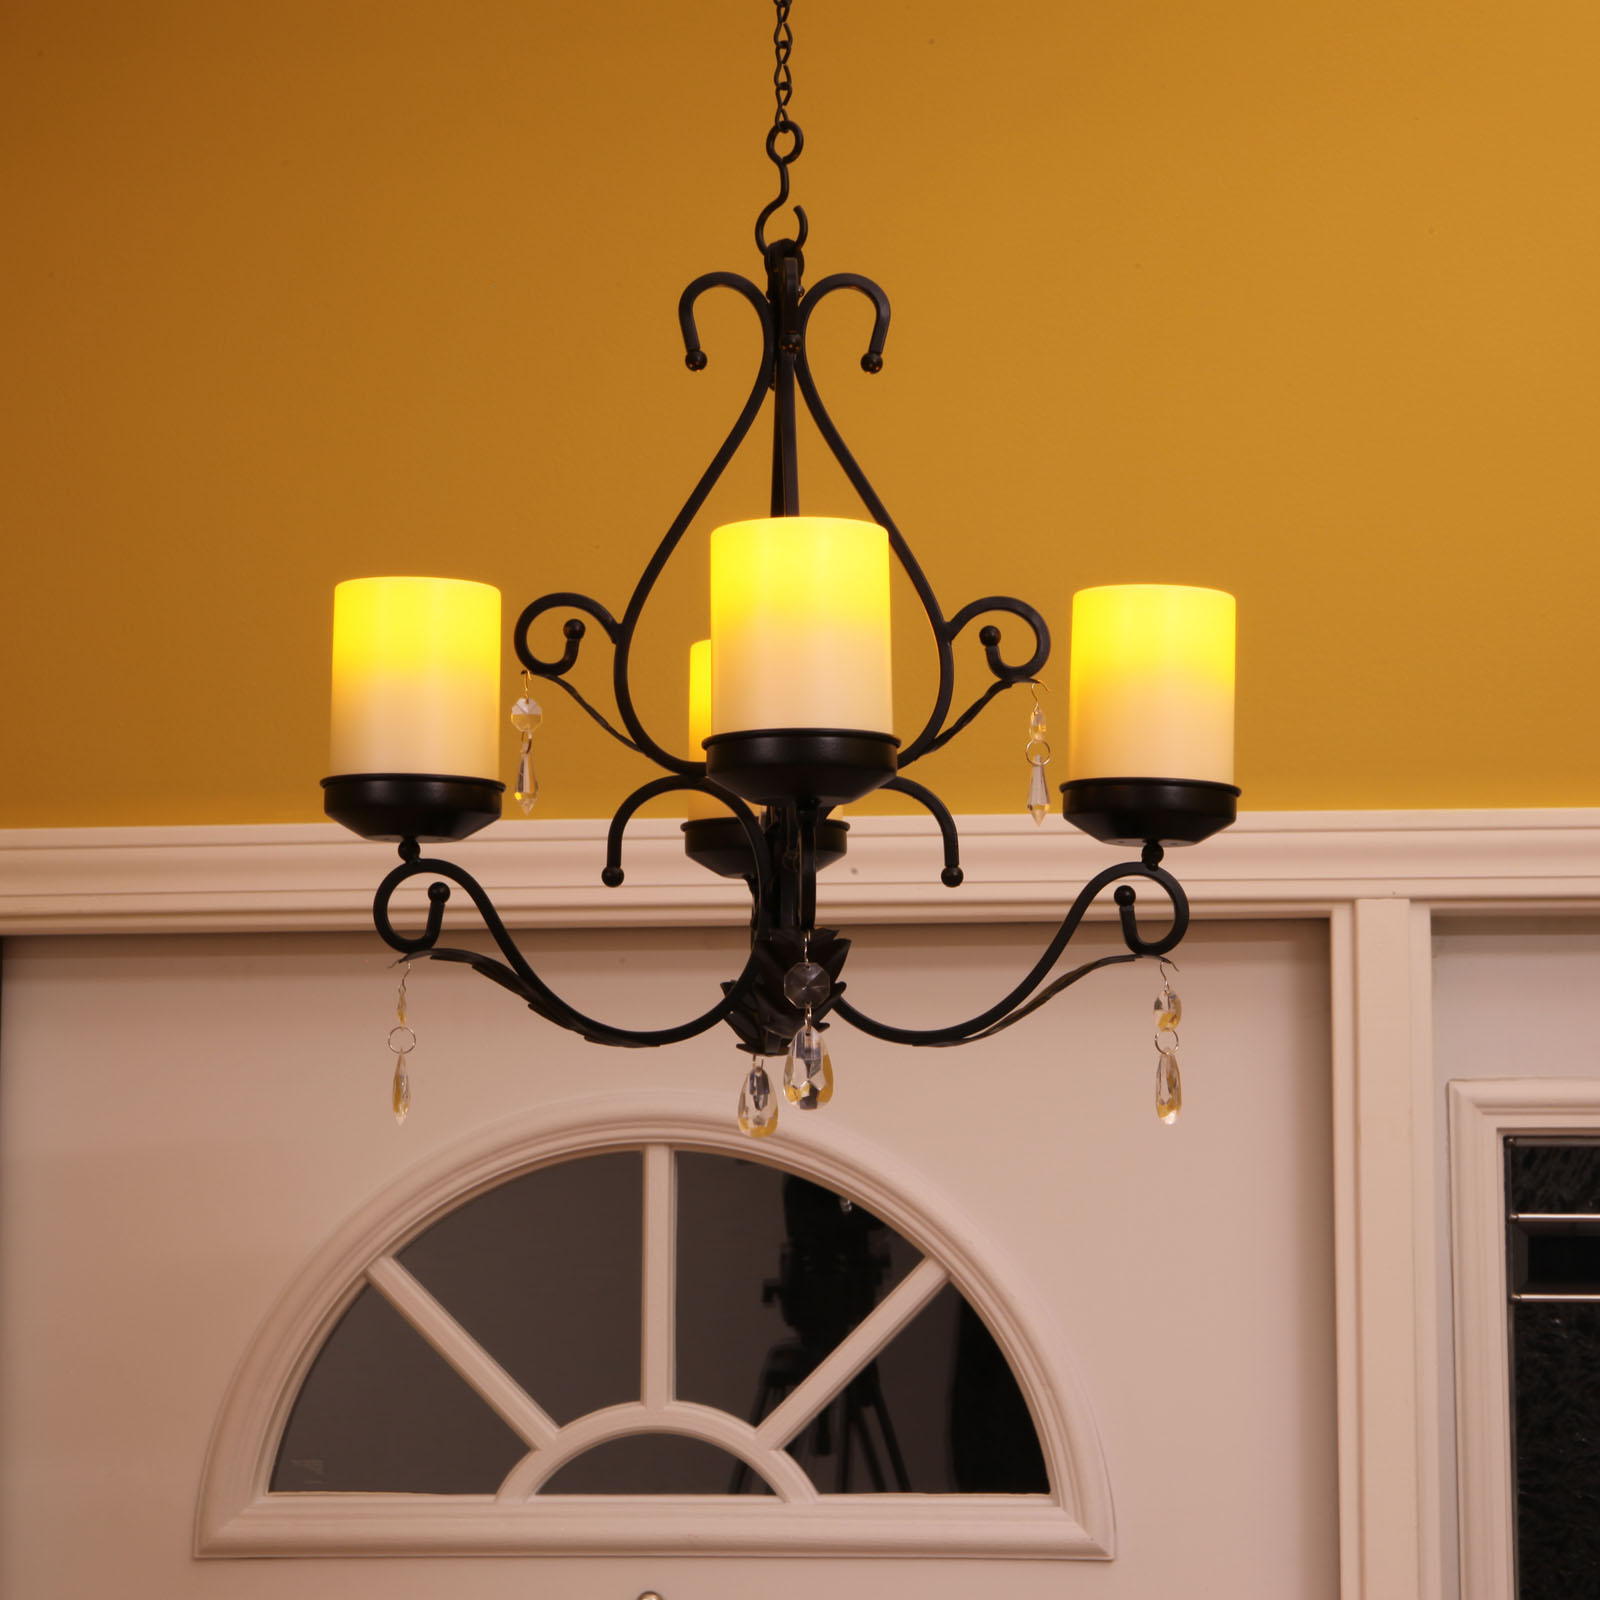 Pillar candle chandelier sconce 2